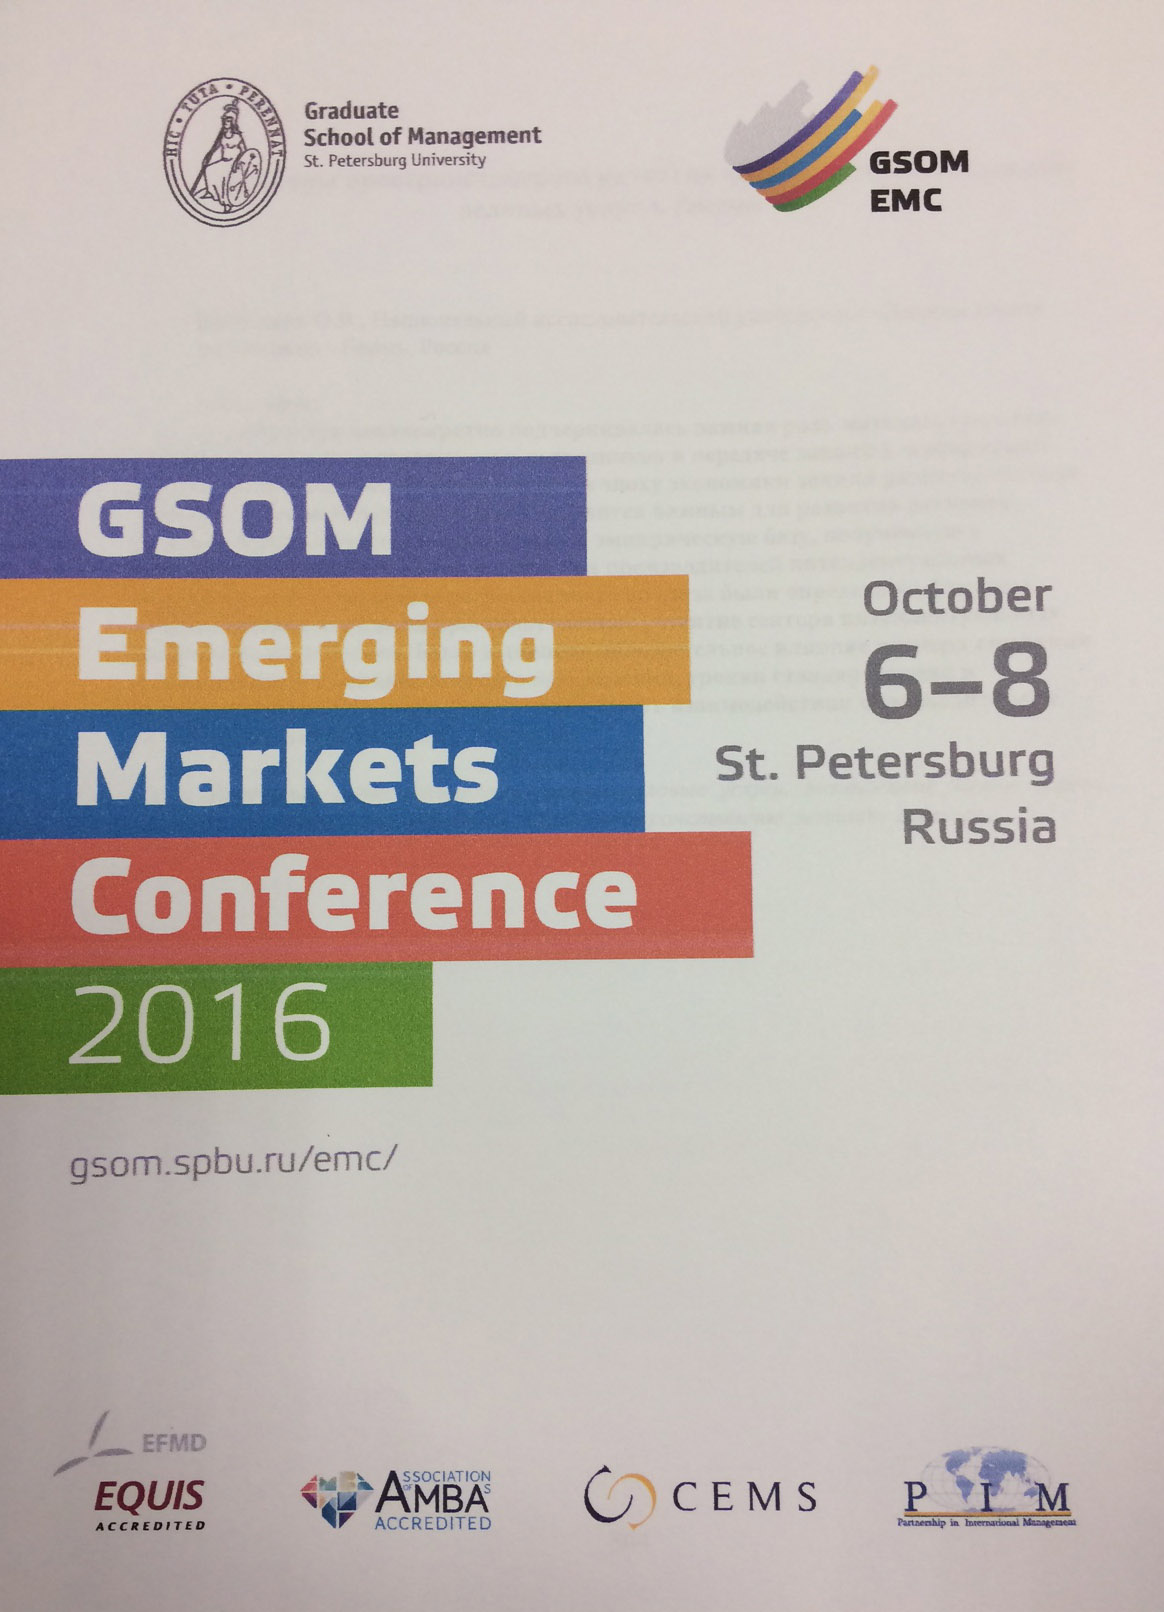 GSOM EMERGING MARKETS CONFERENCE 2016